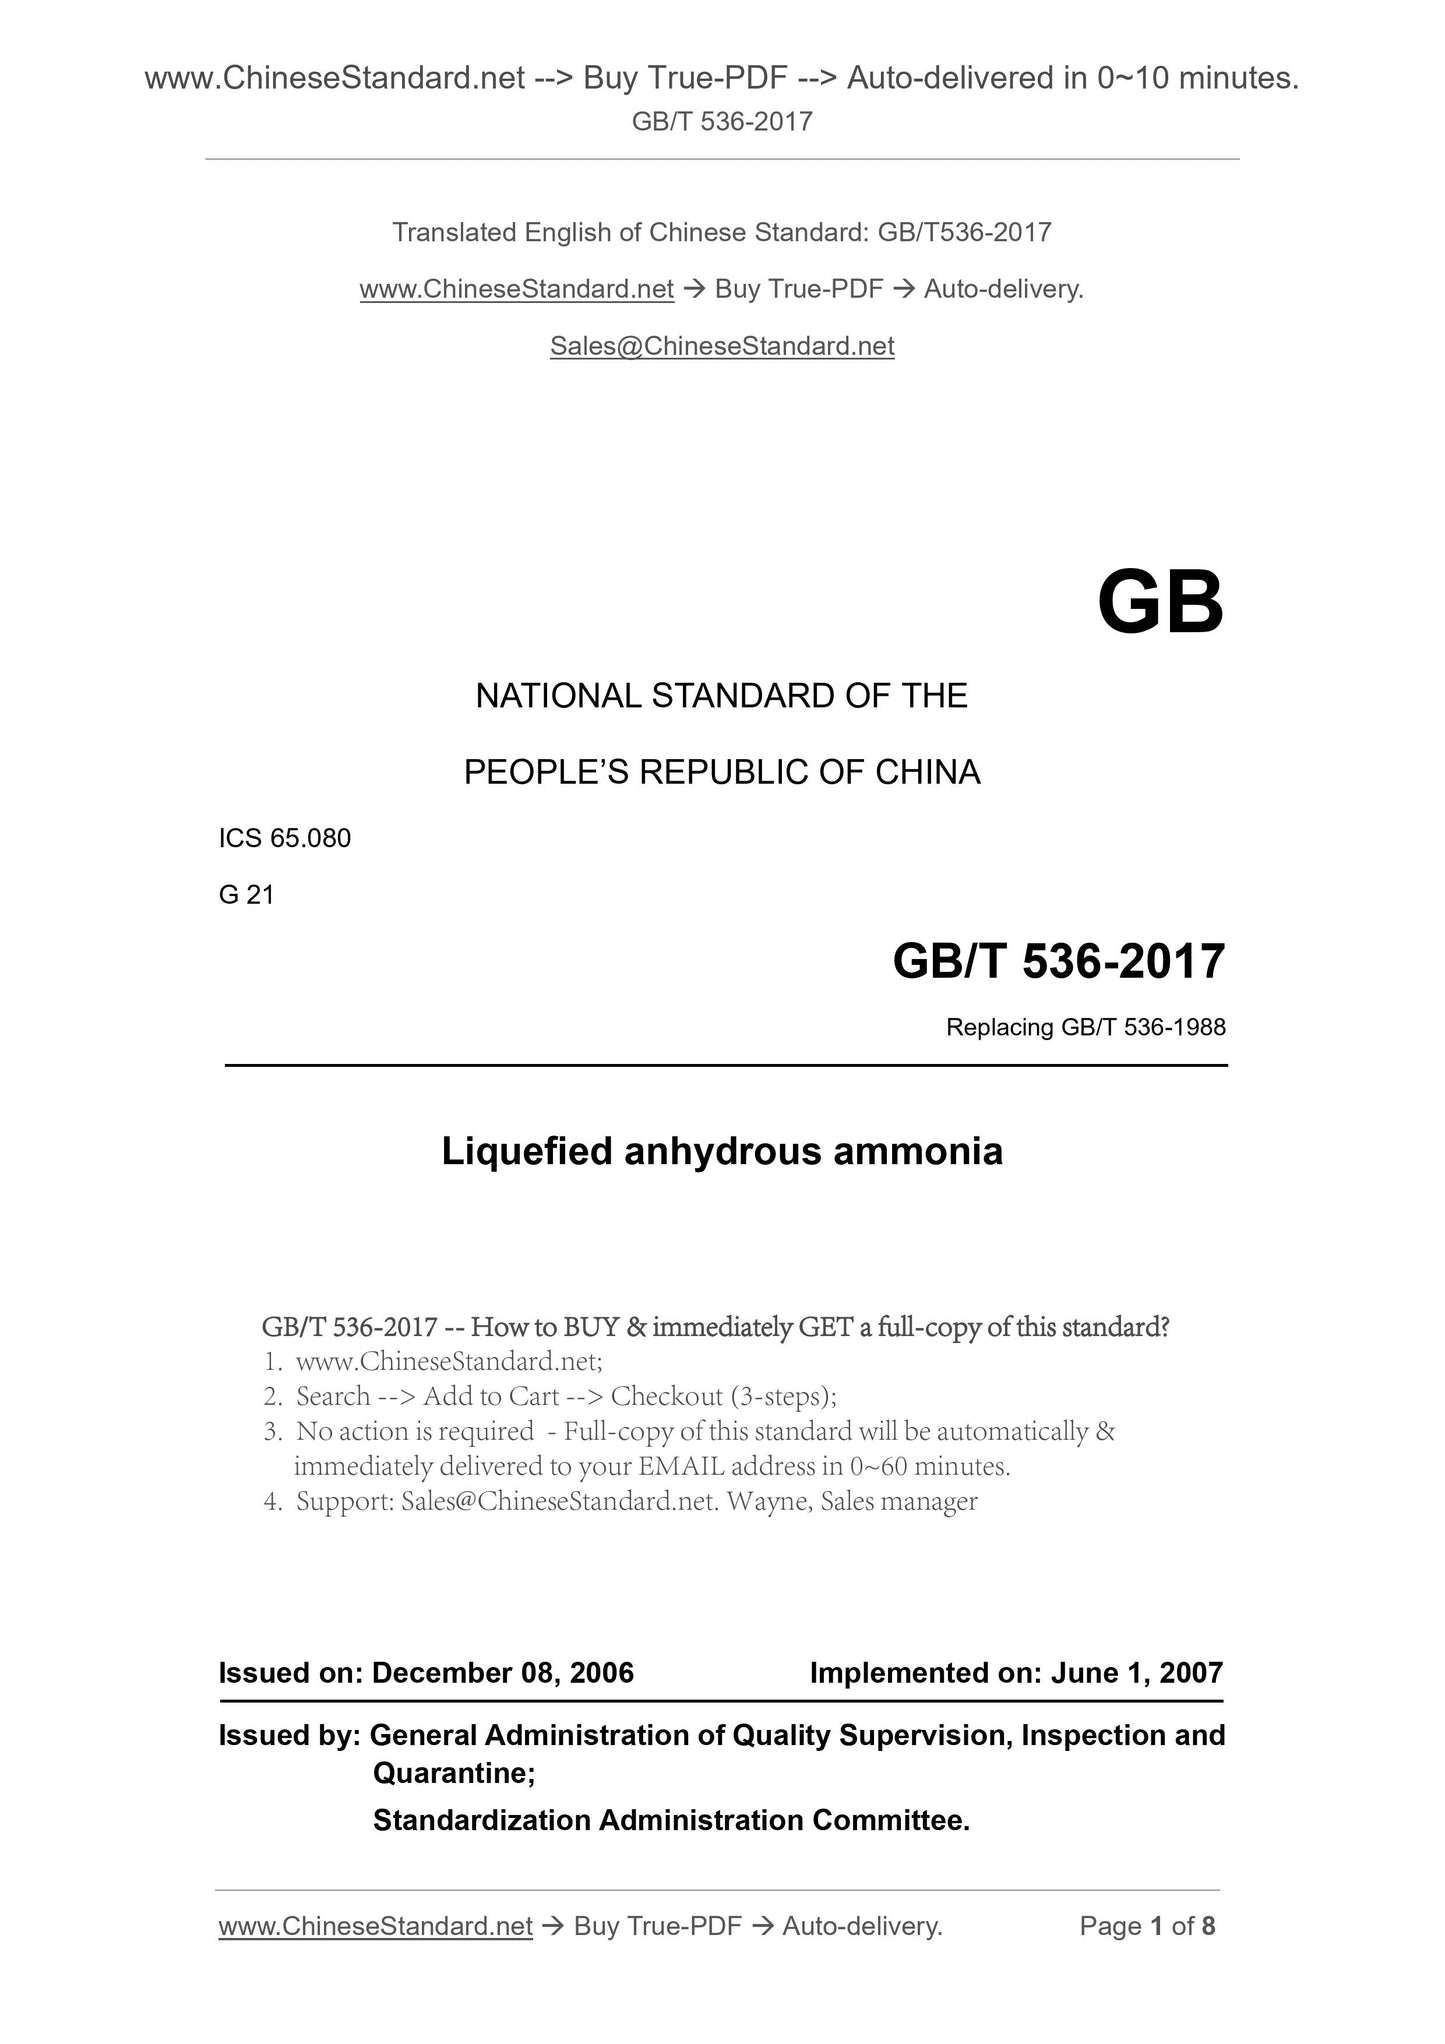 GB/T 536-2017 Page 1